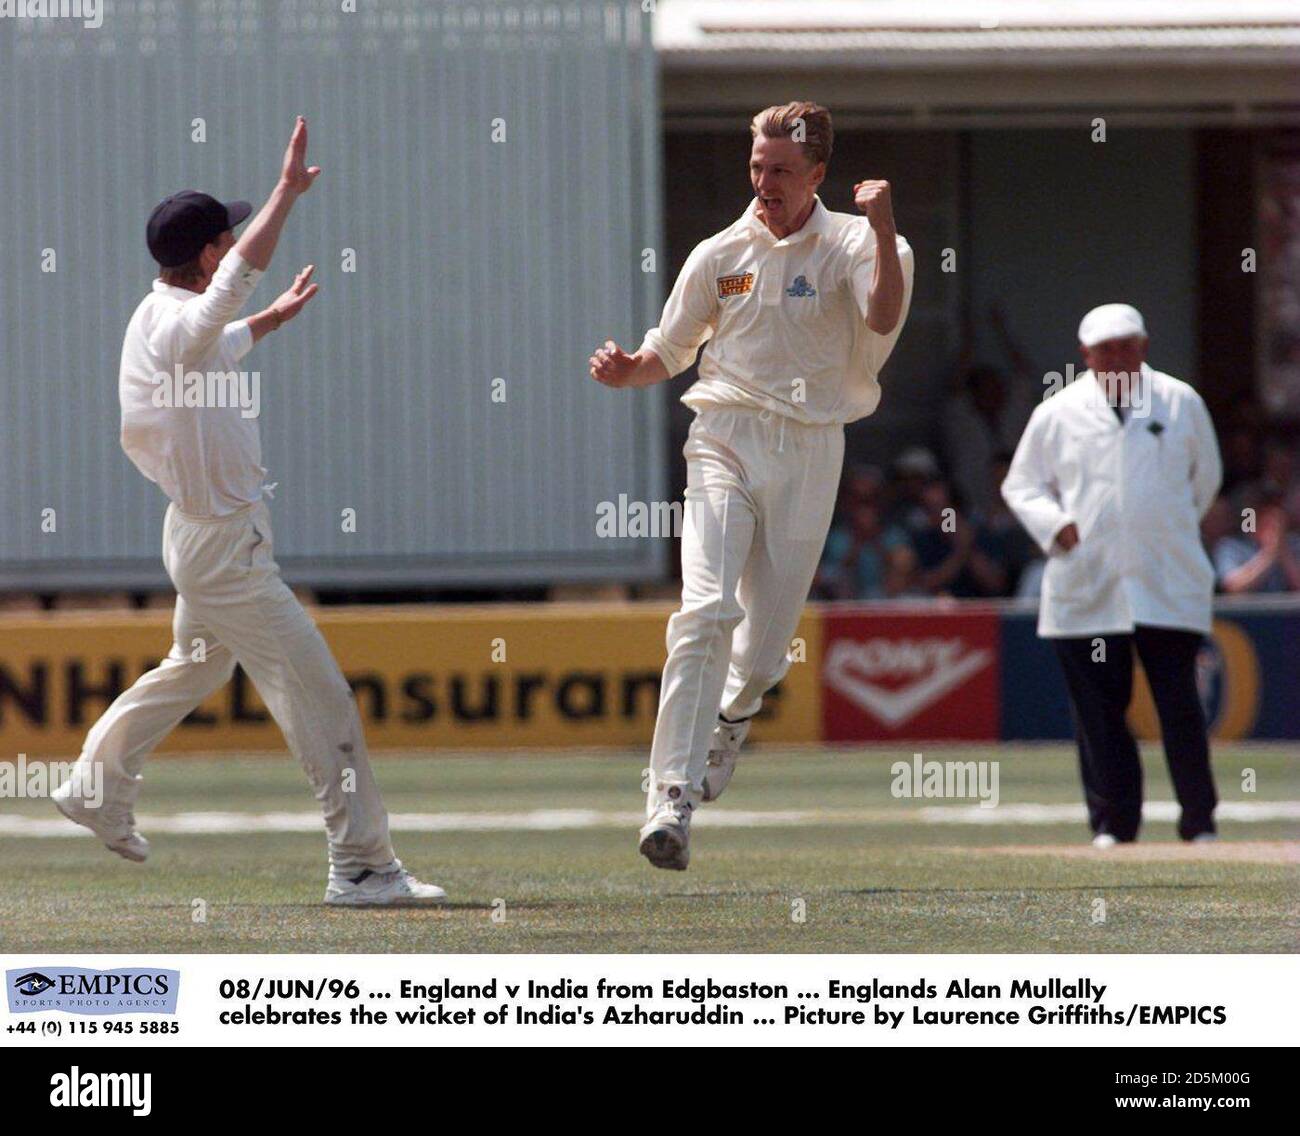 08/JUN/96 ... England v India from Edgbaston ... Englands Alan Mullally celebrates the wicket of India's Azharuddin ... Picture by Laurence Griffiths/EMPICS Stock Photo